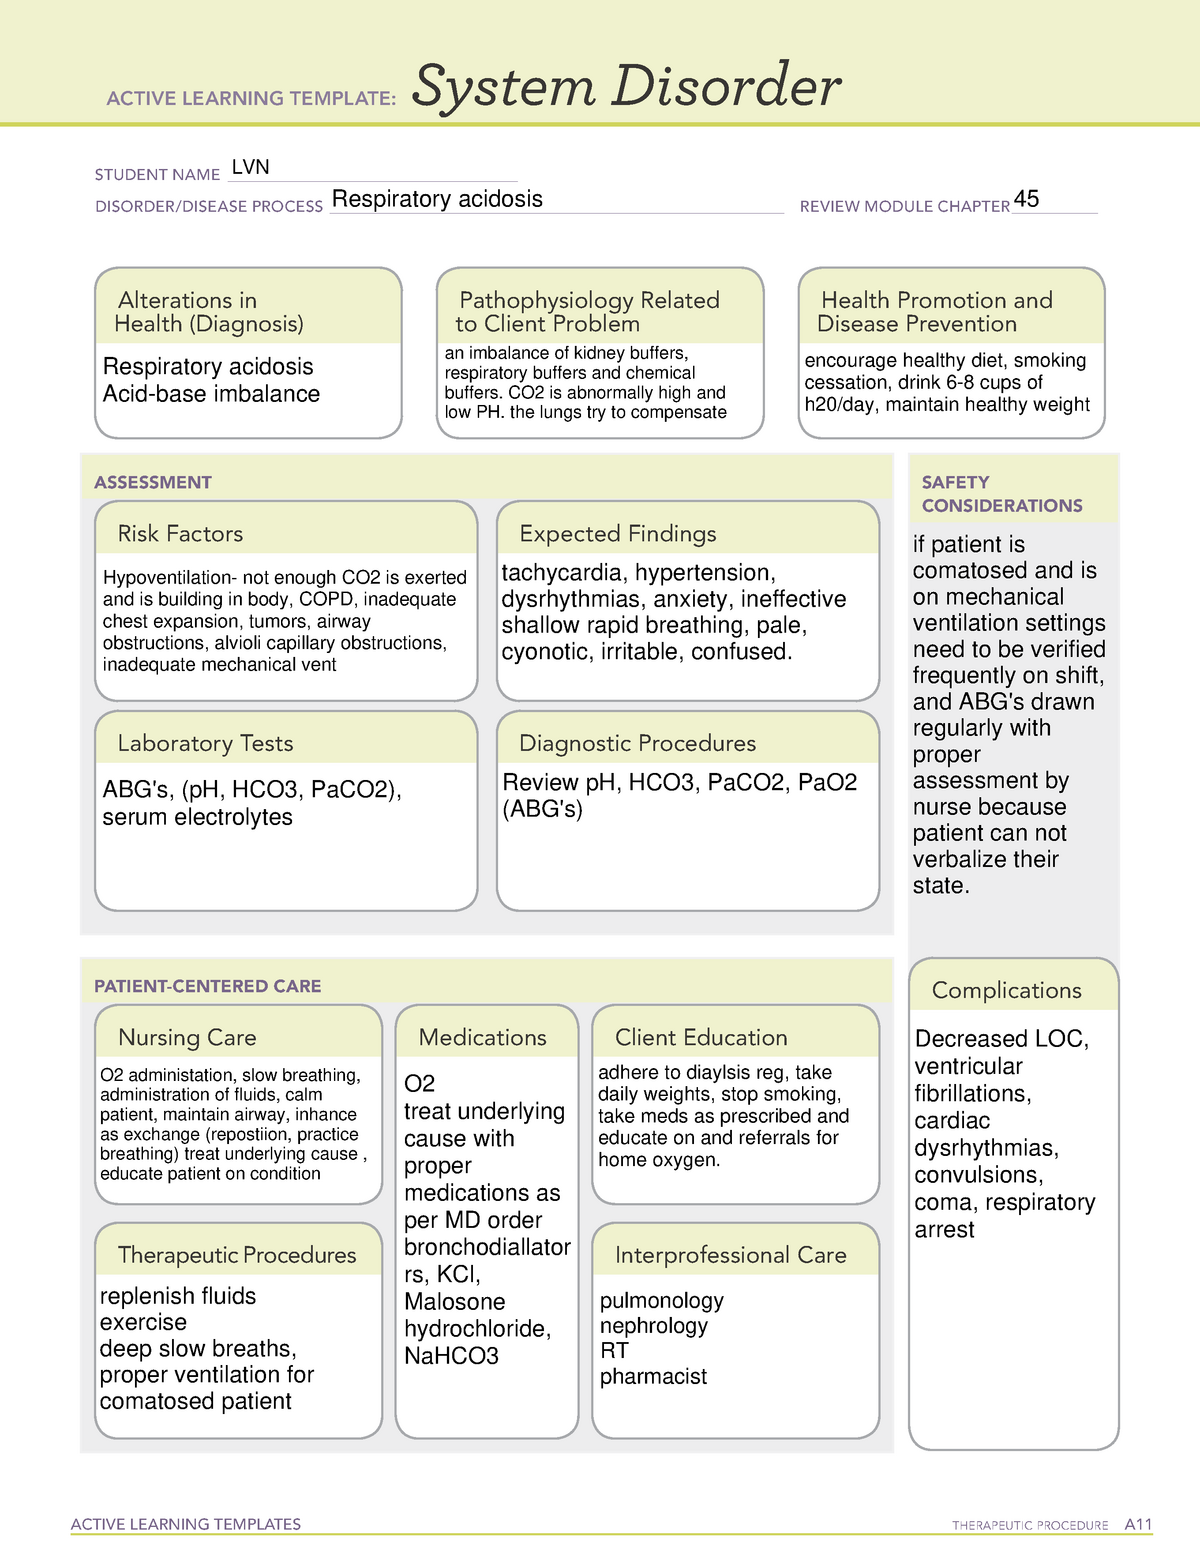 System disorder respiratory acidosis ACTIVE LEARNING TEMPLATES